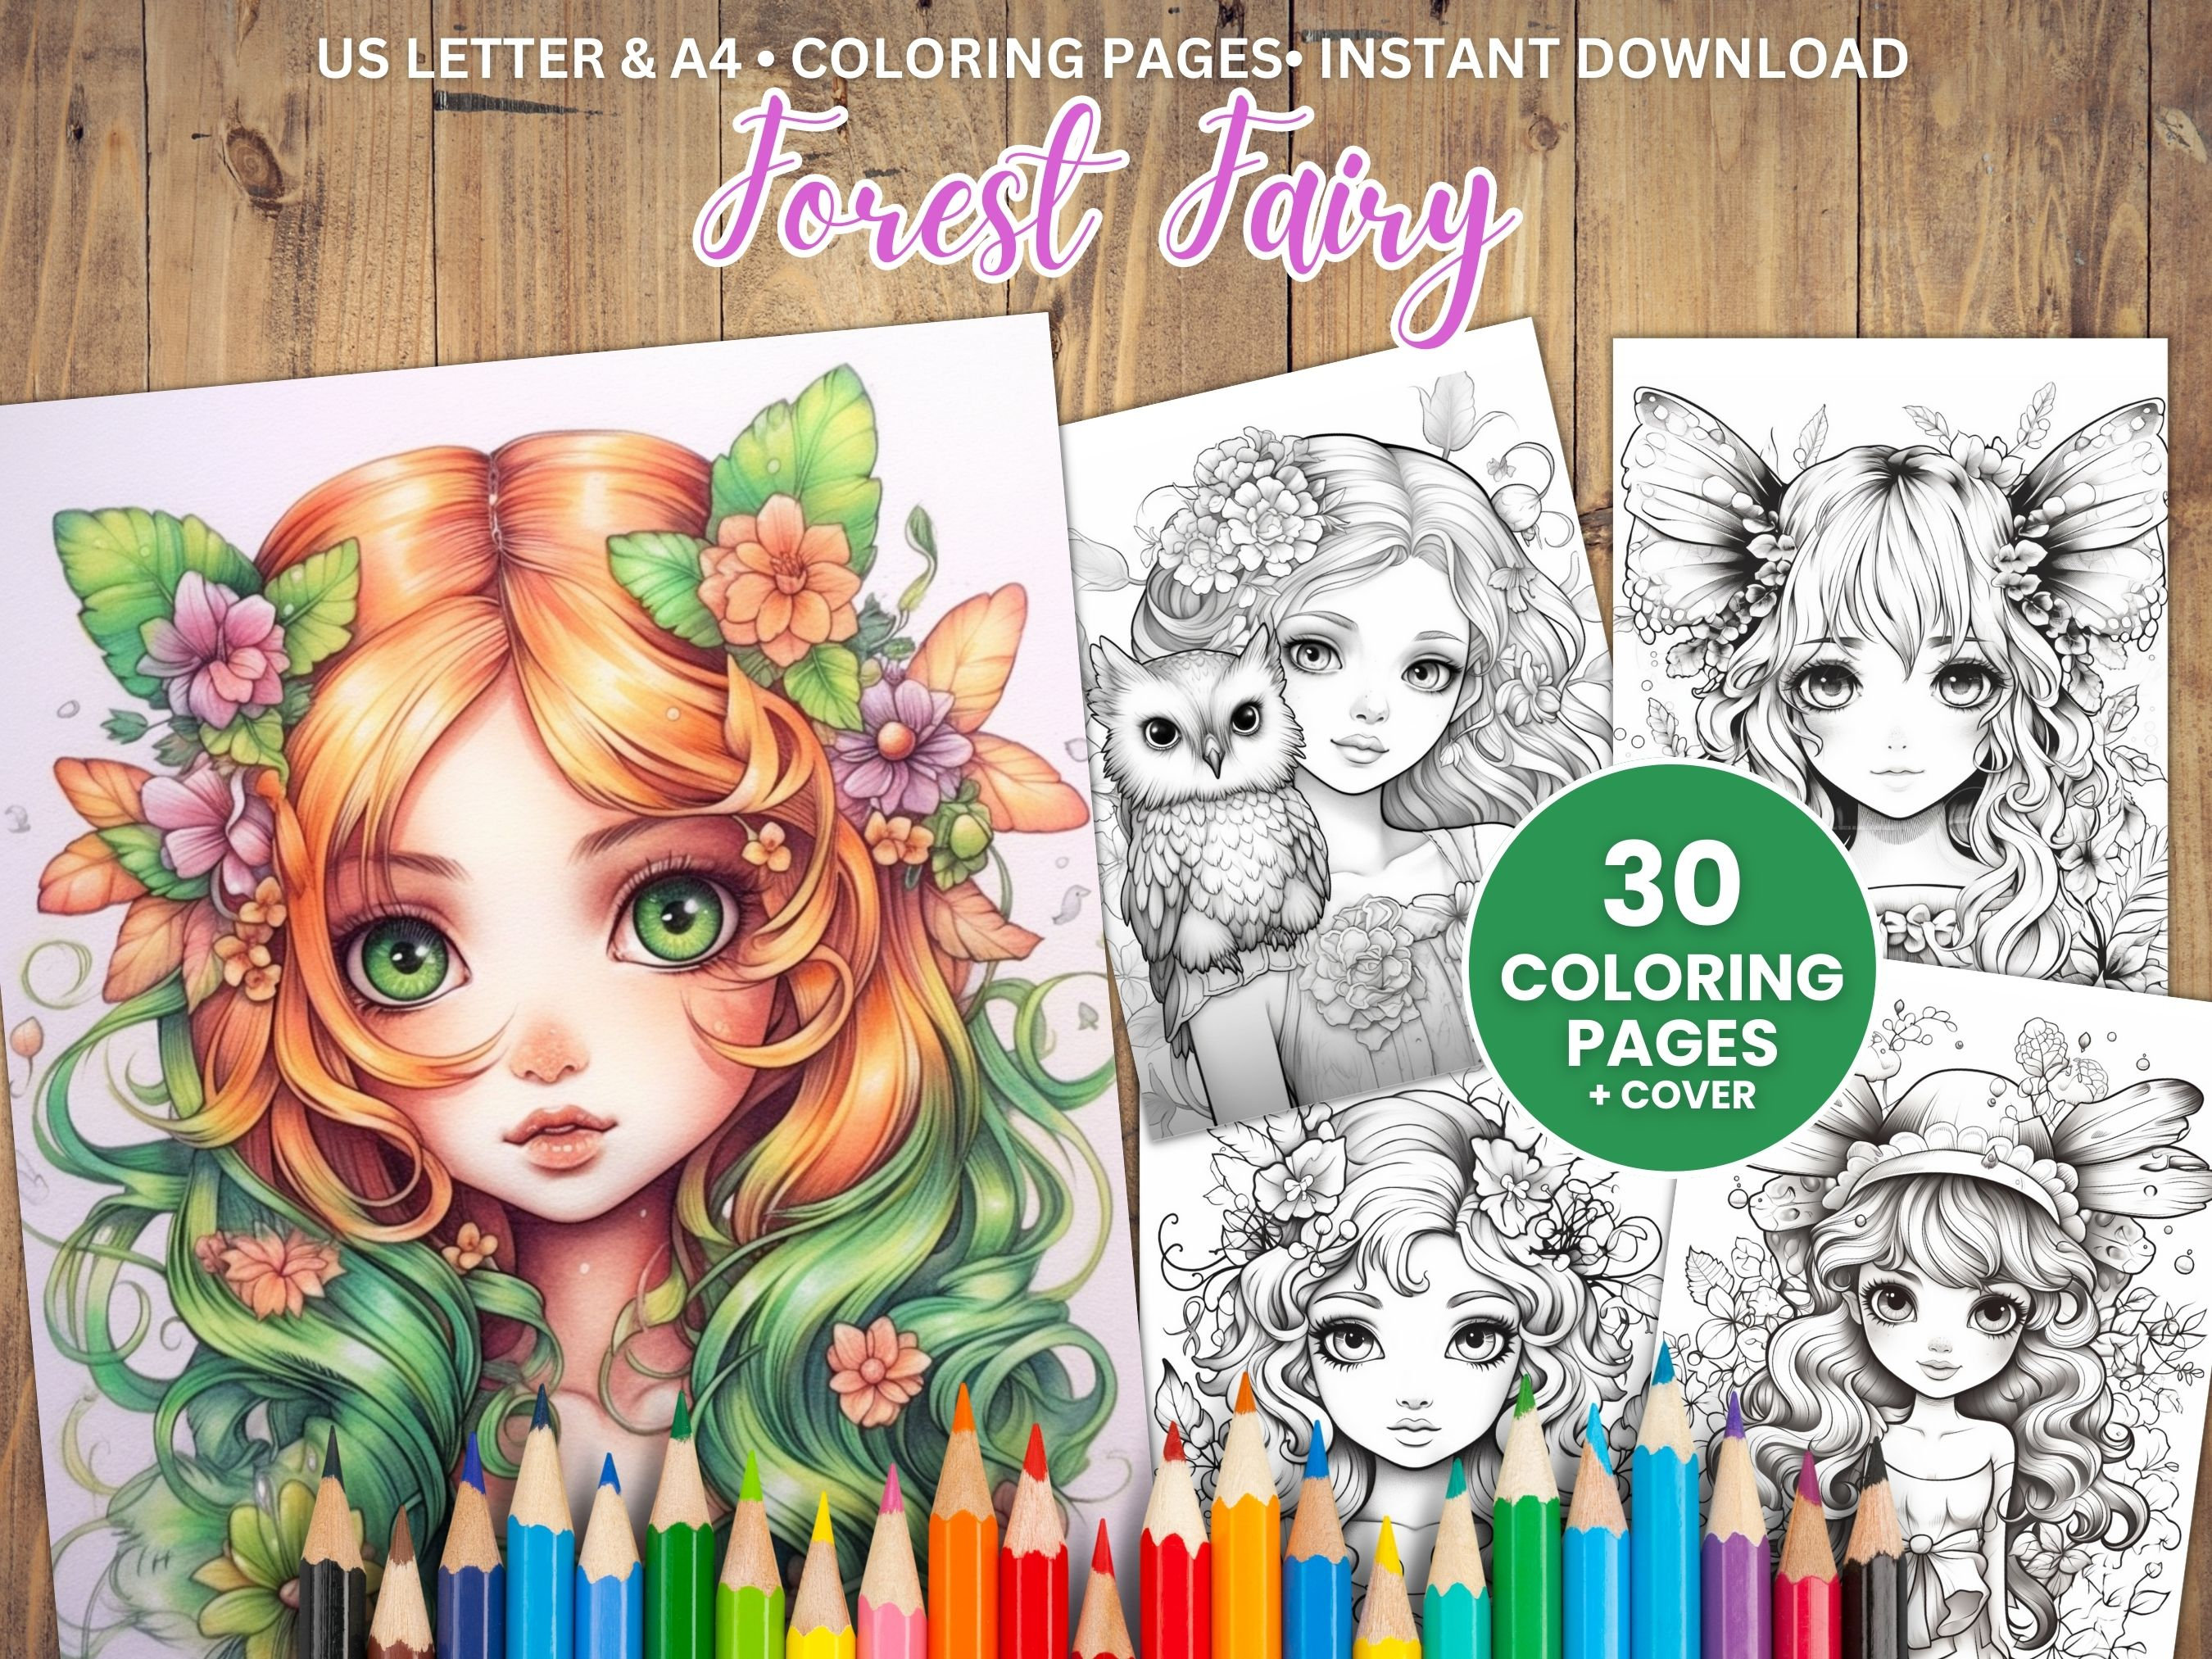 Anime Retro Girls Coloring Book 70 Page Manga Fantasy Anime Coloring Pages  for Adults & Children, Instant Download, Printable PDF 